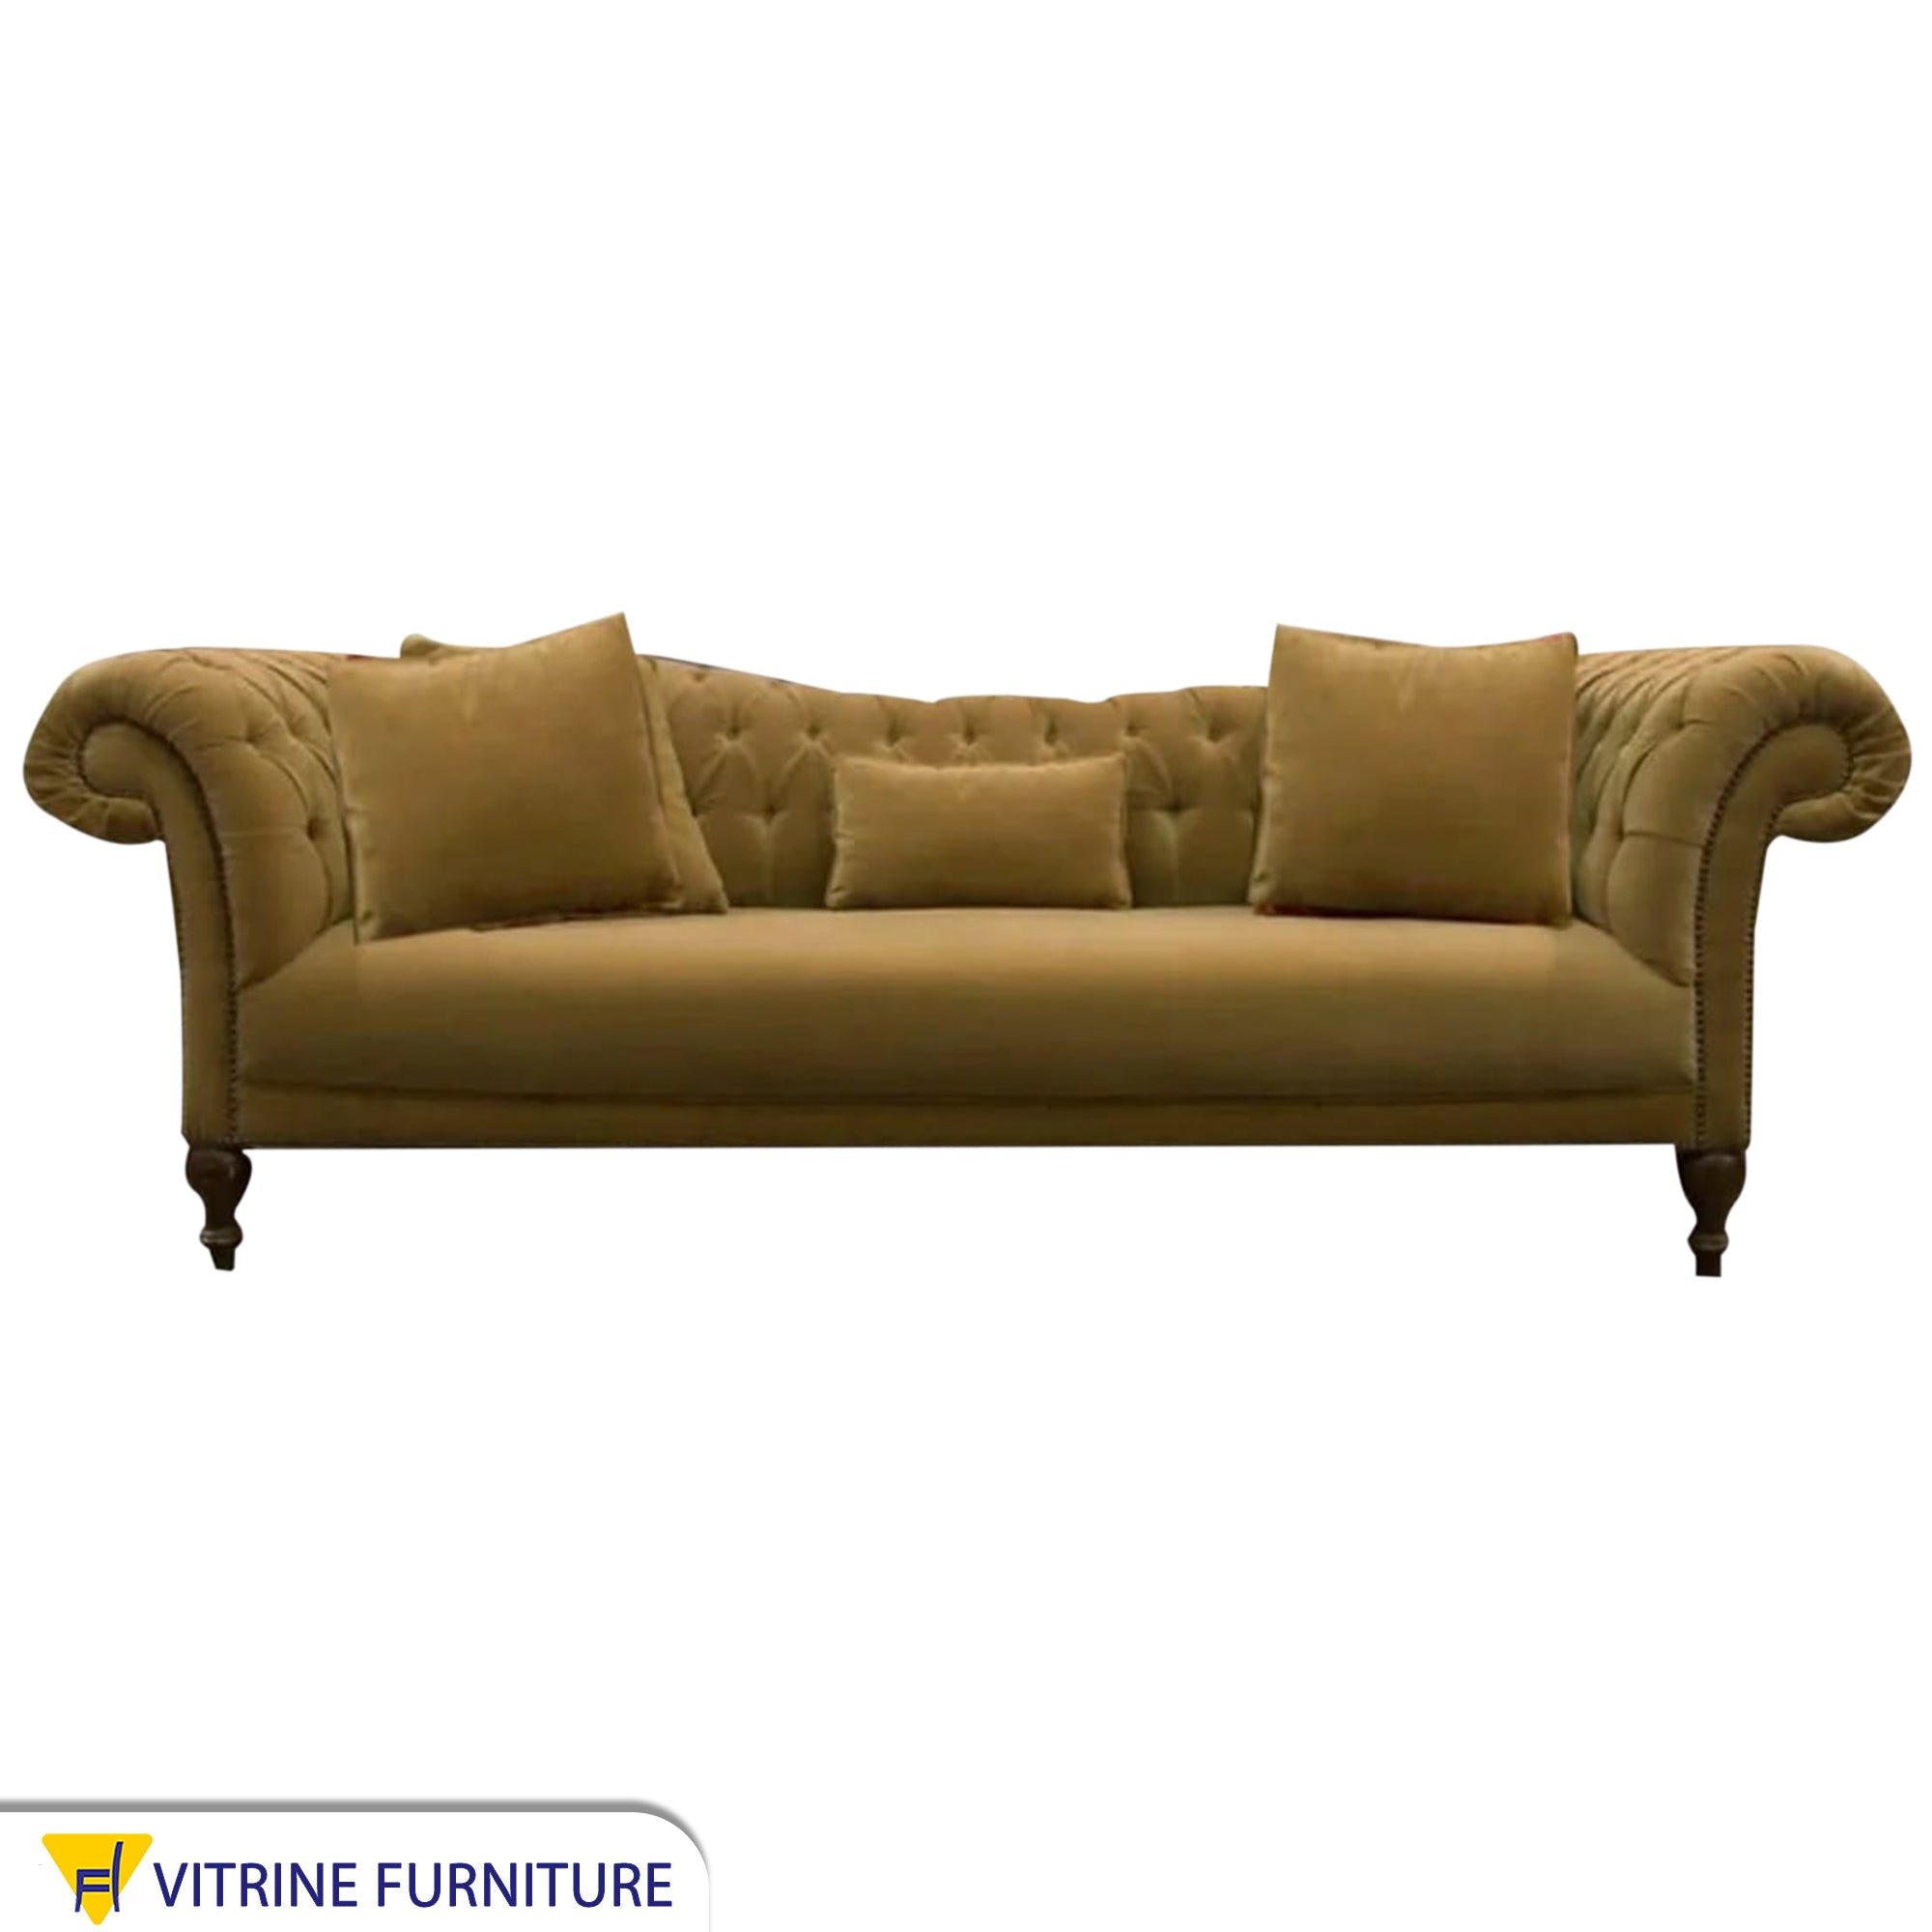 A sofa with twisted cylindrical armrests